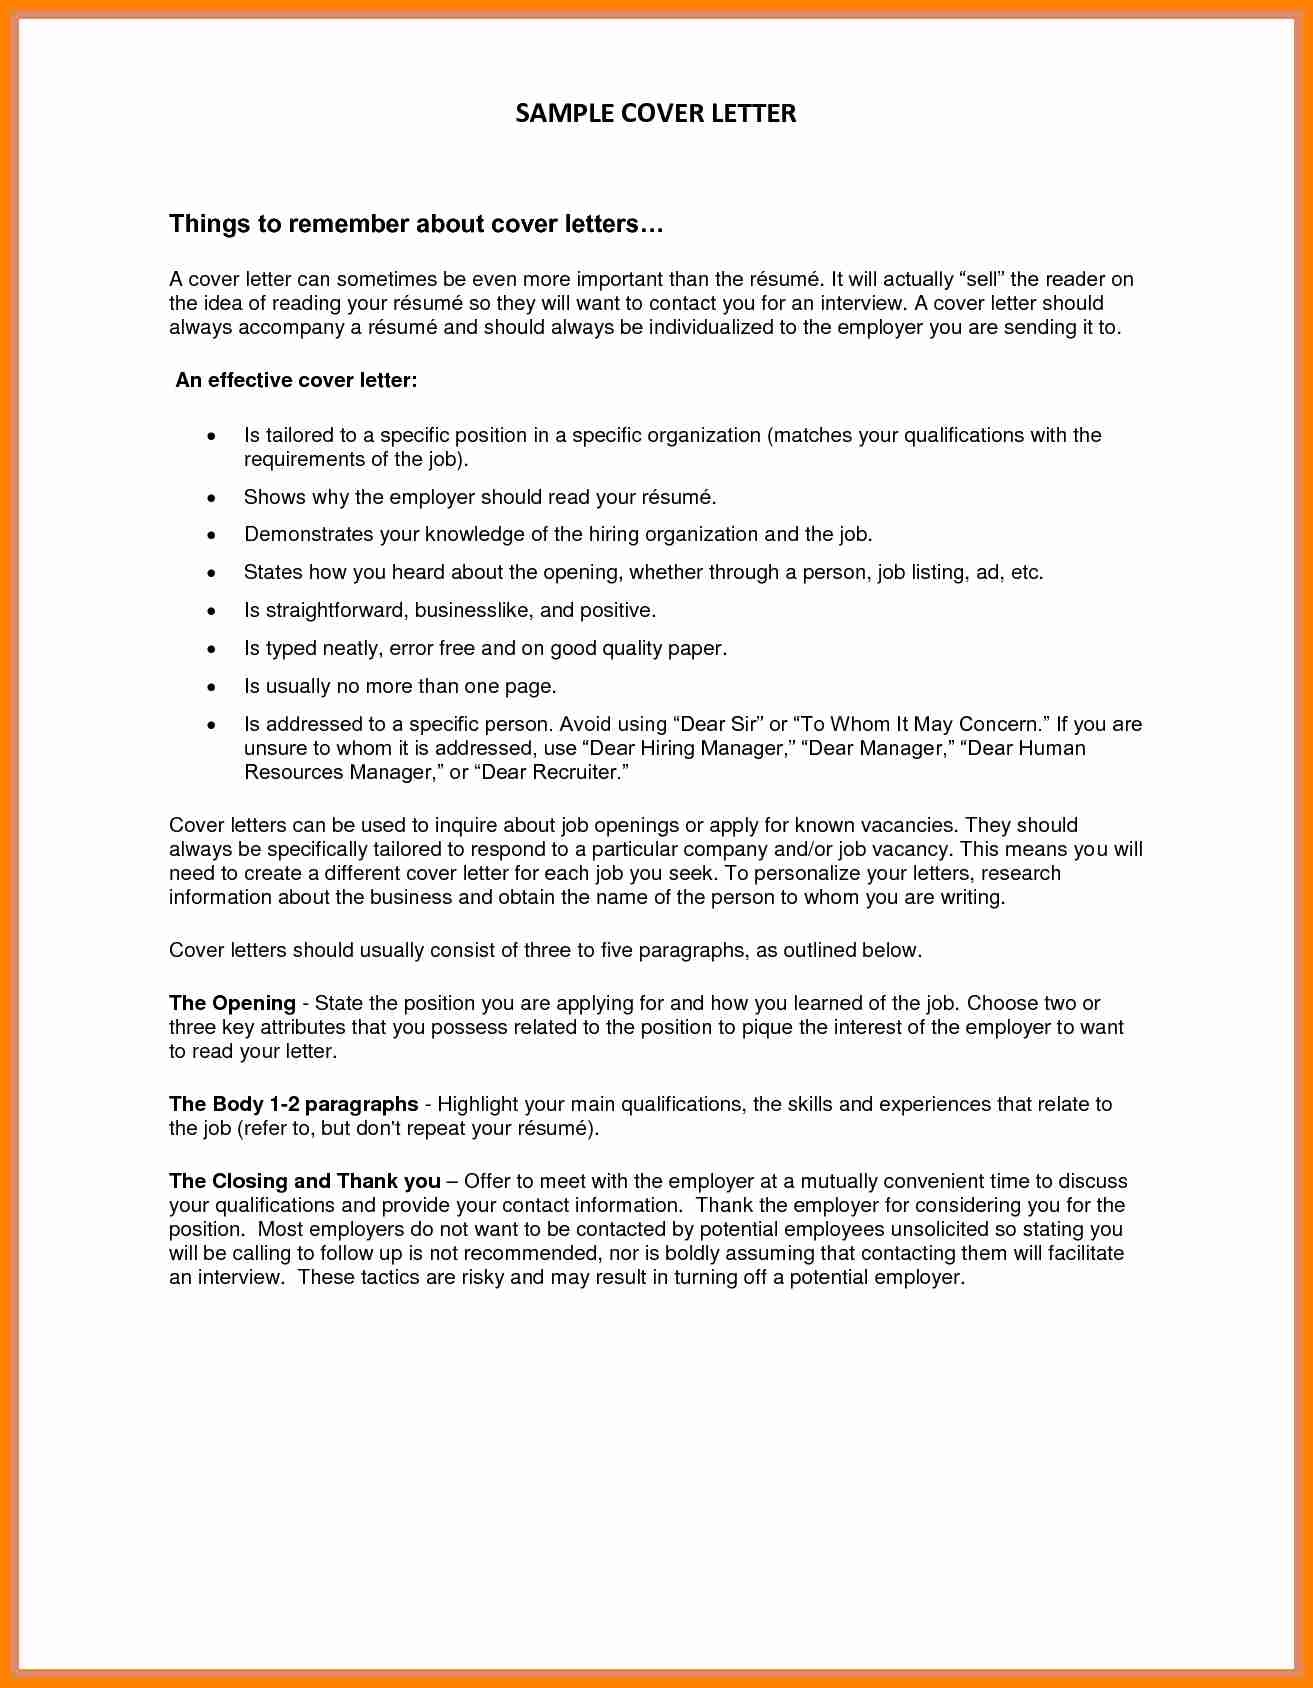 Cover Letter Salutation If Unknown Free Resume Templates pertaining to dimensions 1313 X 1688